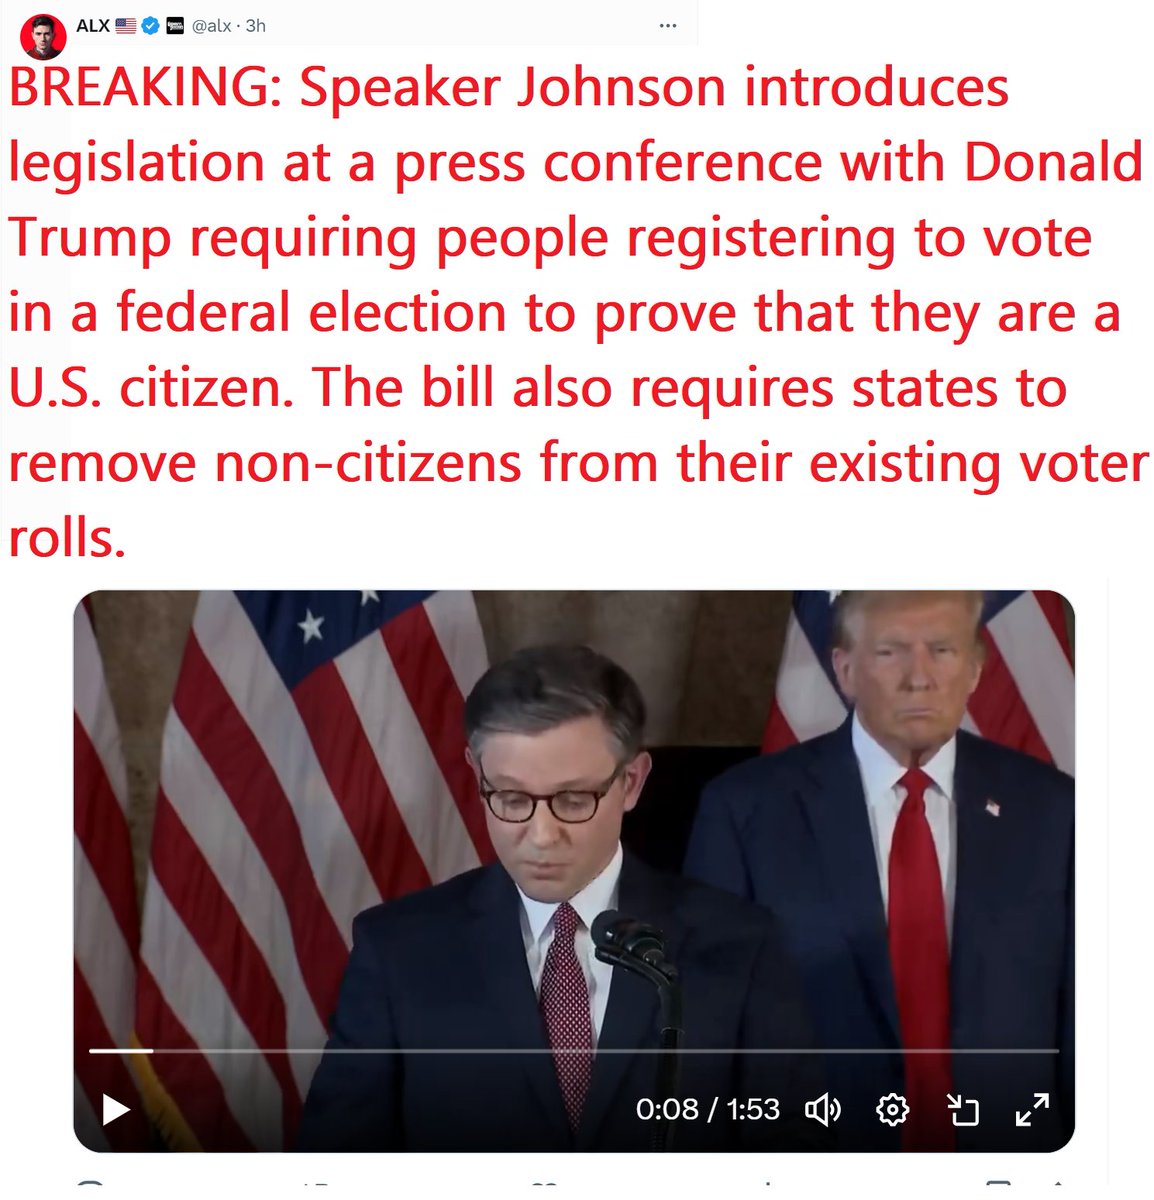 🇺🇸❤️PATRIOT FOLLOW TRAIN❤️🇺🇸 🇺🇸❤️HAPPY RED FRIDAY EVENING !❤️🇺🇸 🇺🇸❤️DROP YOUR HANDLES ❤️🇺🇸 🇺🇸❤️FOLLOW OTHER PATRIOTS❤️🇺🇸 🔥❤️LIKE & RETWEET IFBAP❤️🔥 🇺🇸❤️PRAY FOR TRUMP❤️🇺🇸 BREAKING: Speaker Johnson introduces legislation at a press conference with Donald Trump requiring…